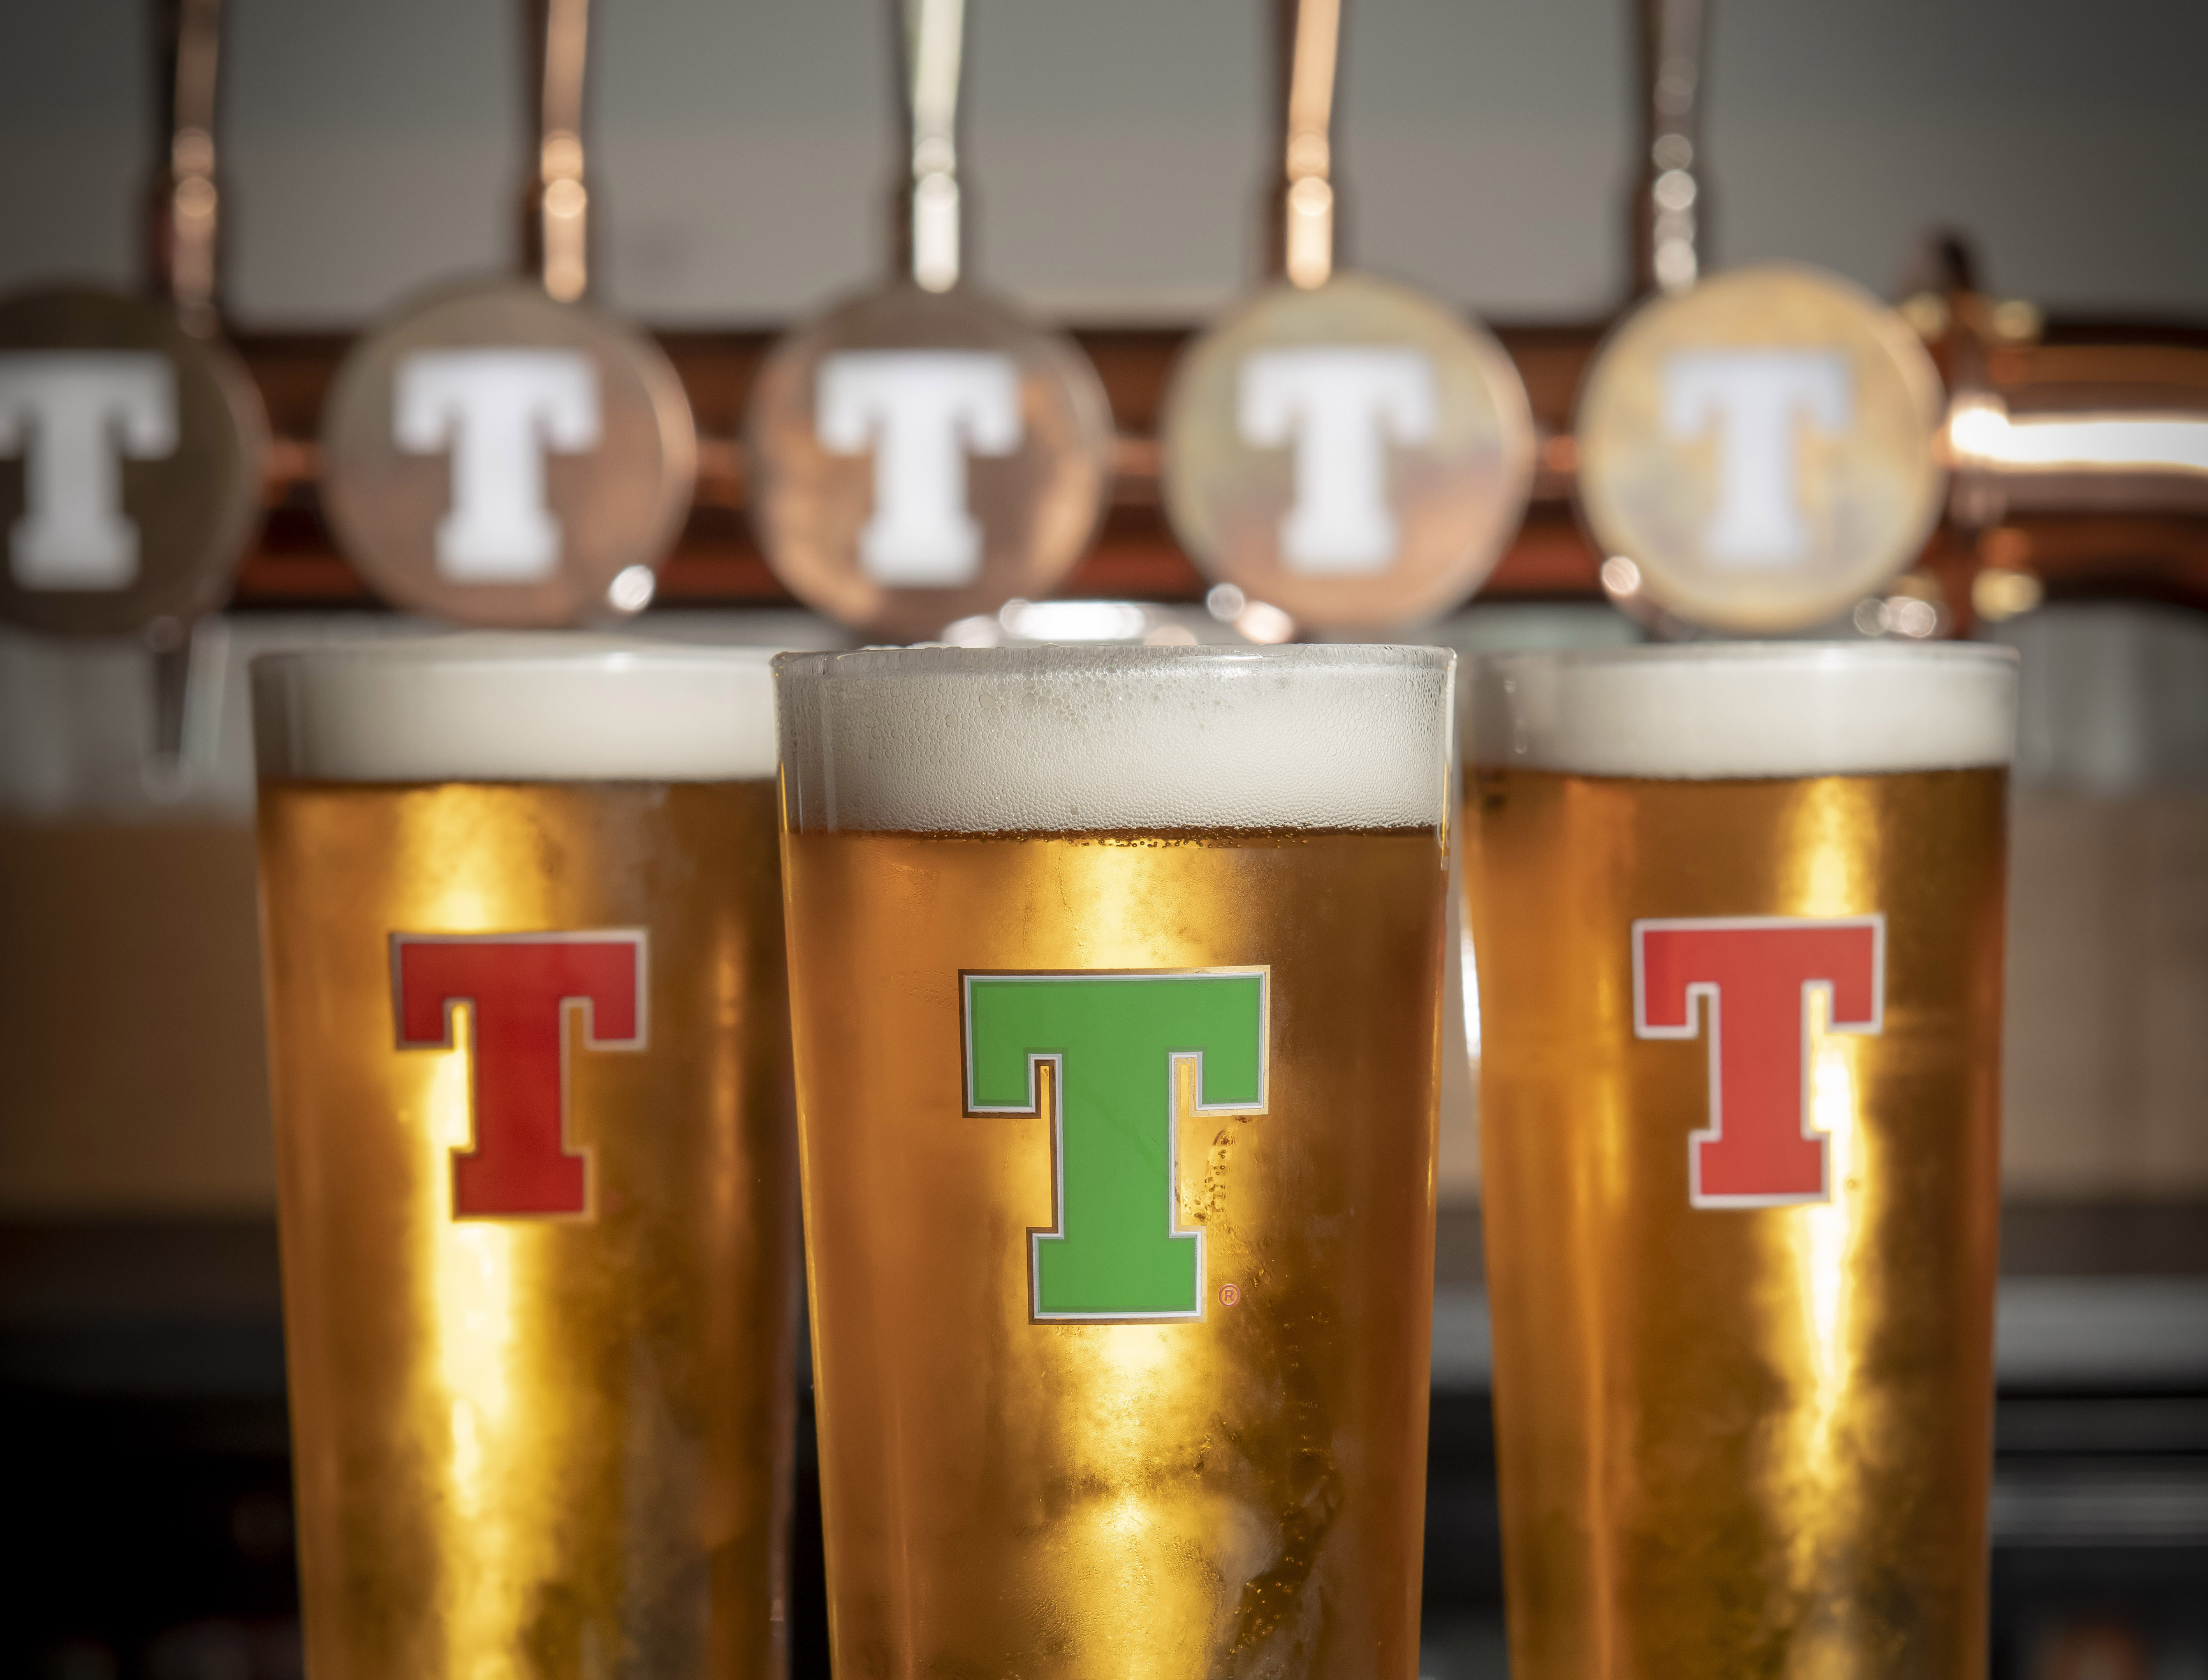 The Scottish brewery has announced plans to invest £14 million on eco-friendly initiatives.